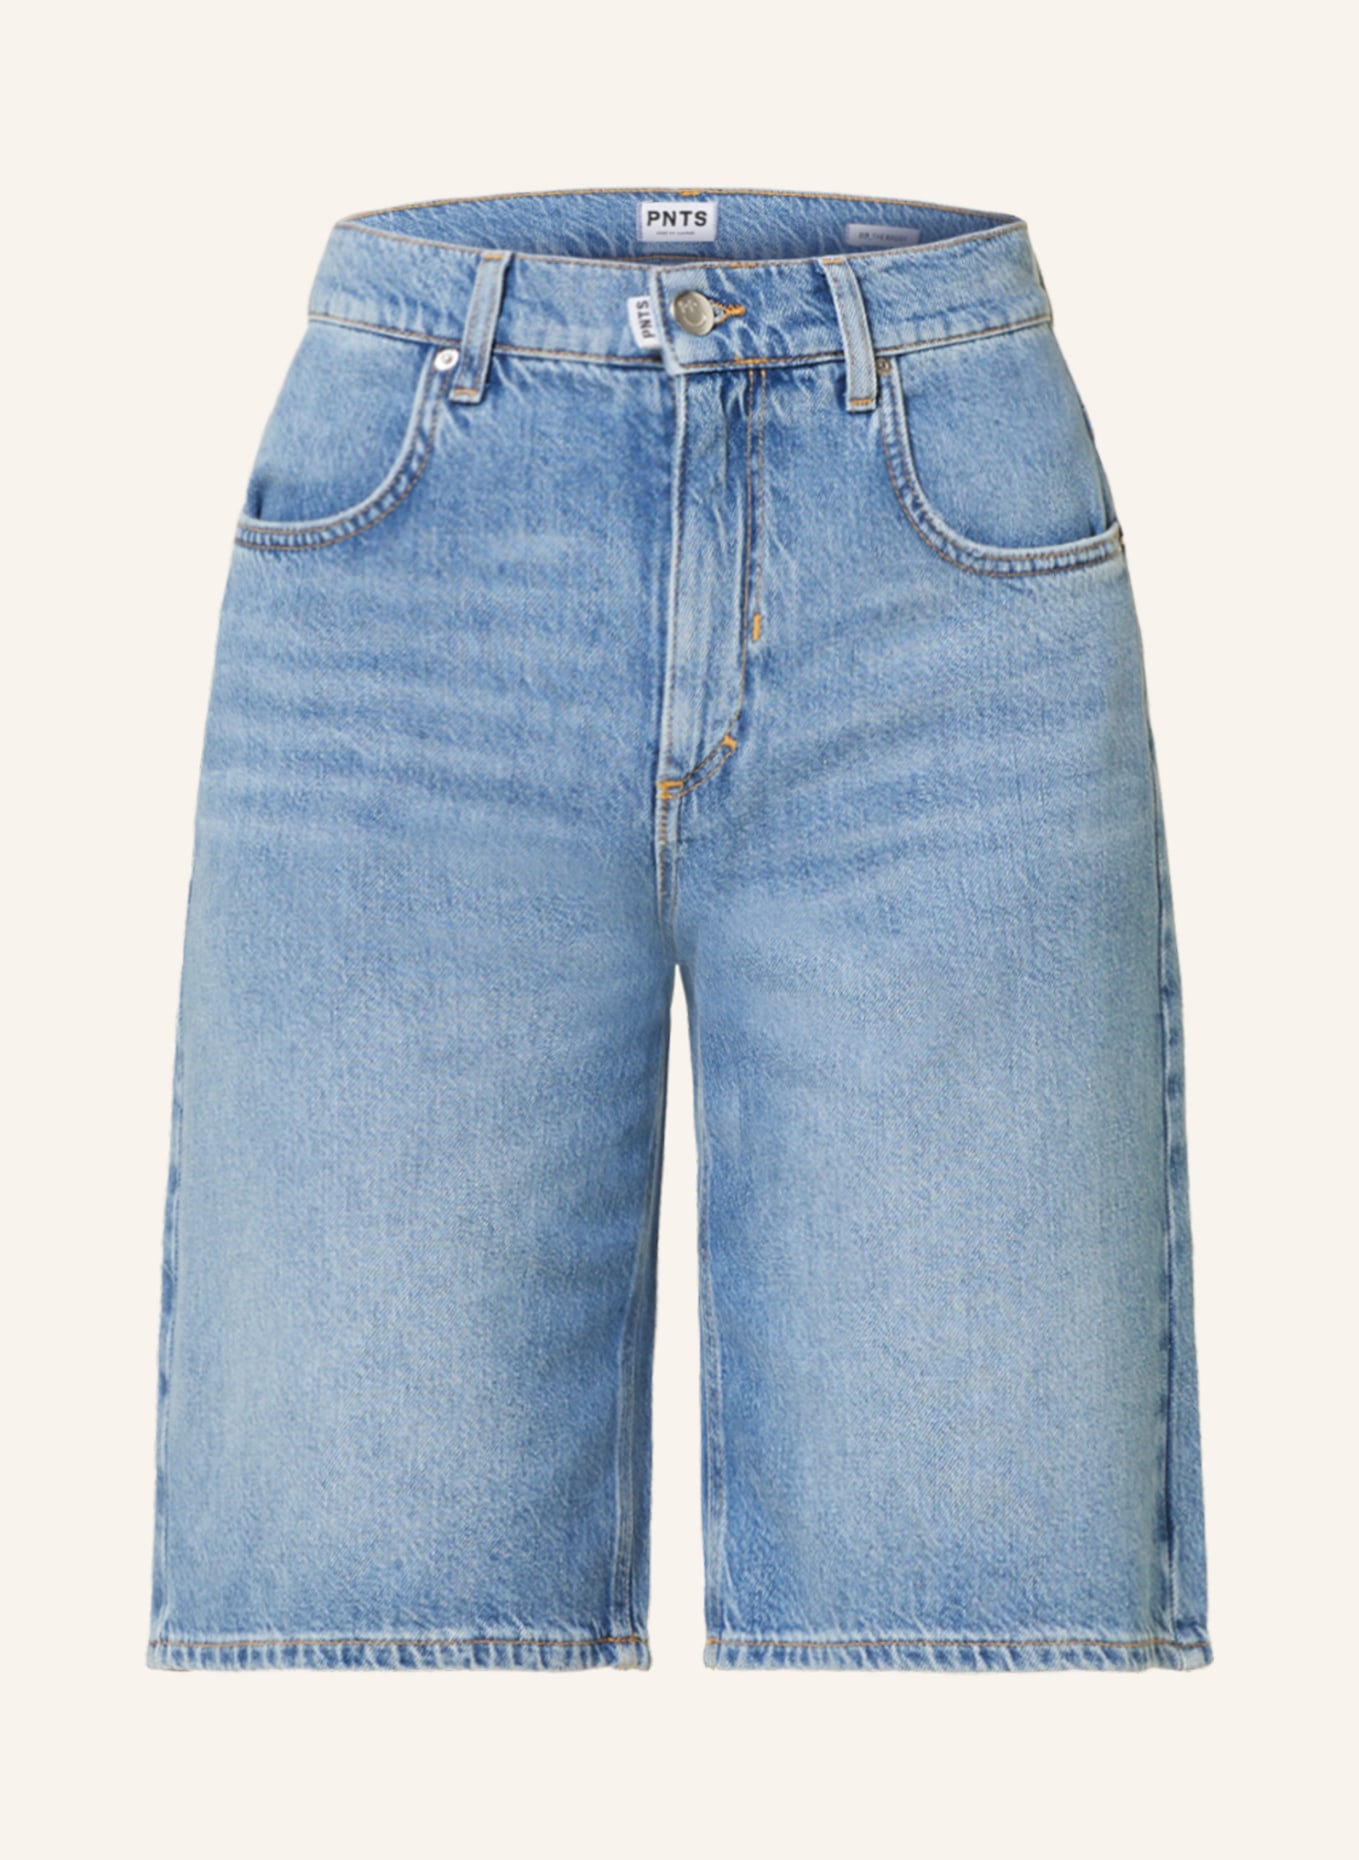 PNTS Jeansshorts THE BAGGY, Farbe: 28 FADED BLUE (Bild 1)